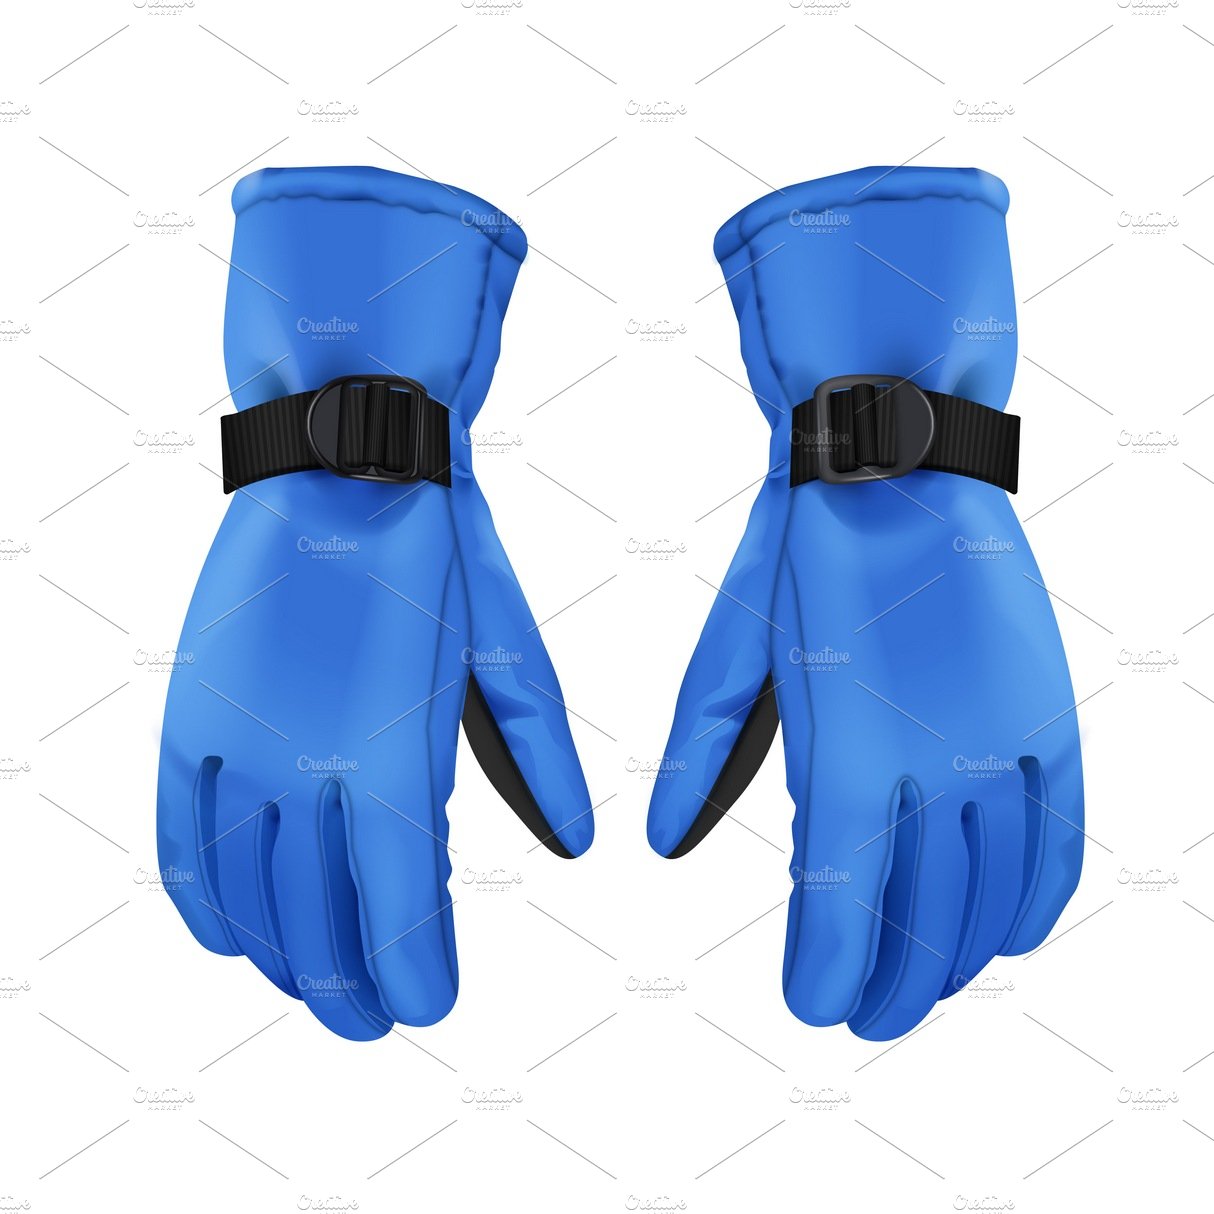 Pair of blue sport winter gloves cover image.